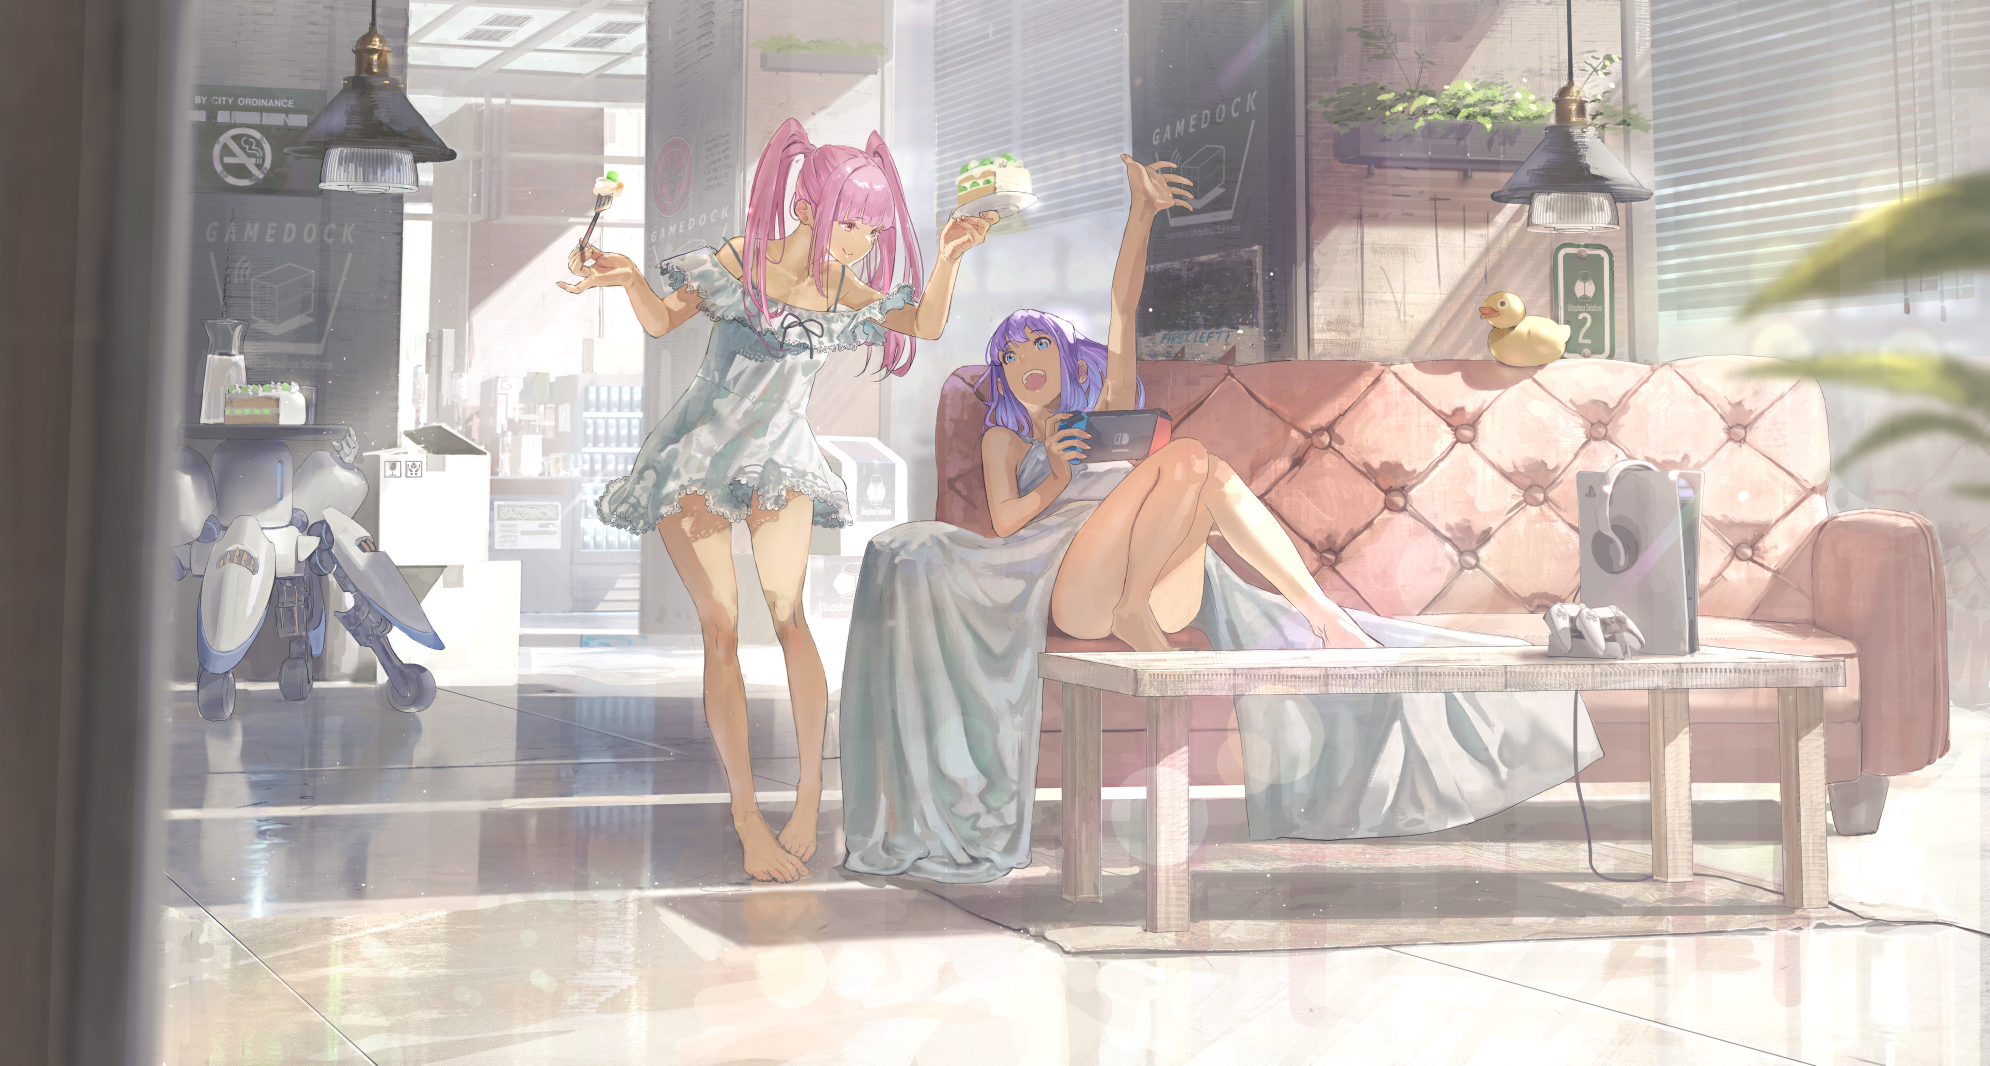 Anime 1990x1066 anime anime girls standing couch feet dress twintails long hair smiling cake fork plates sunlight blinds window rubber ducks leaves Nintendo Switch consoles Playstation 5 controllers